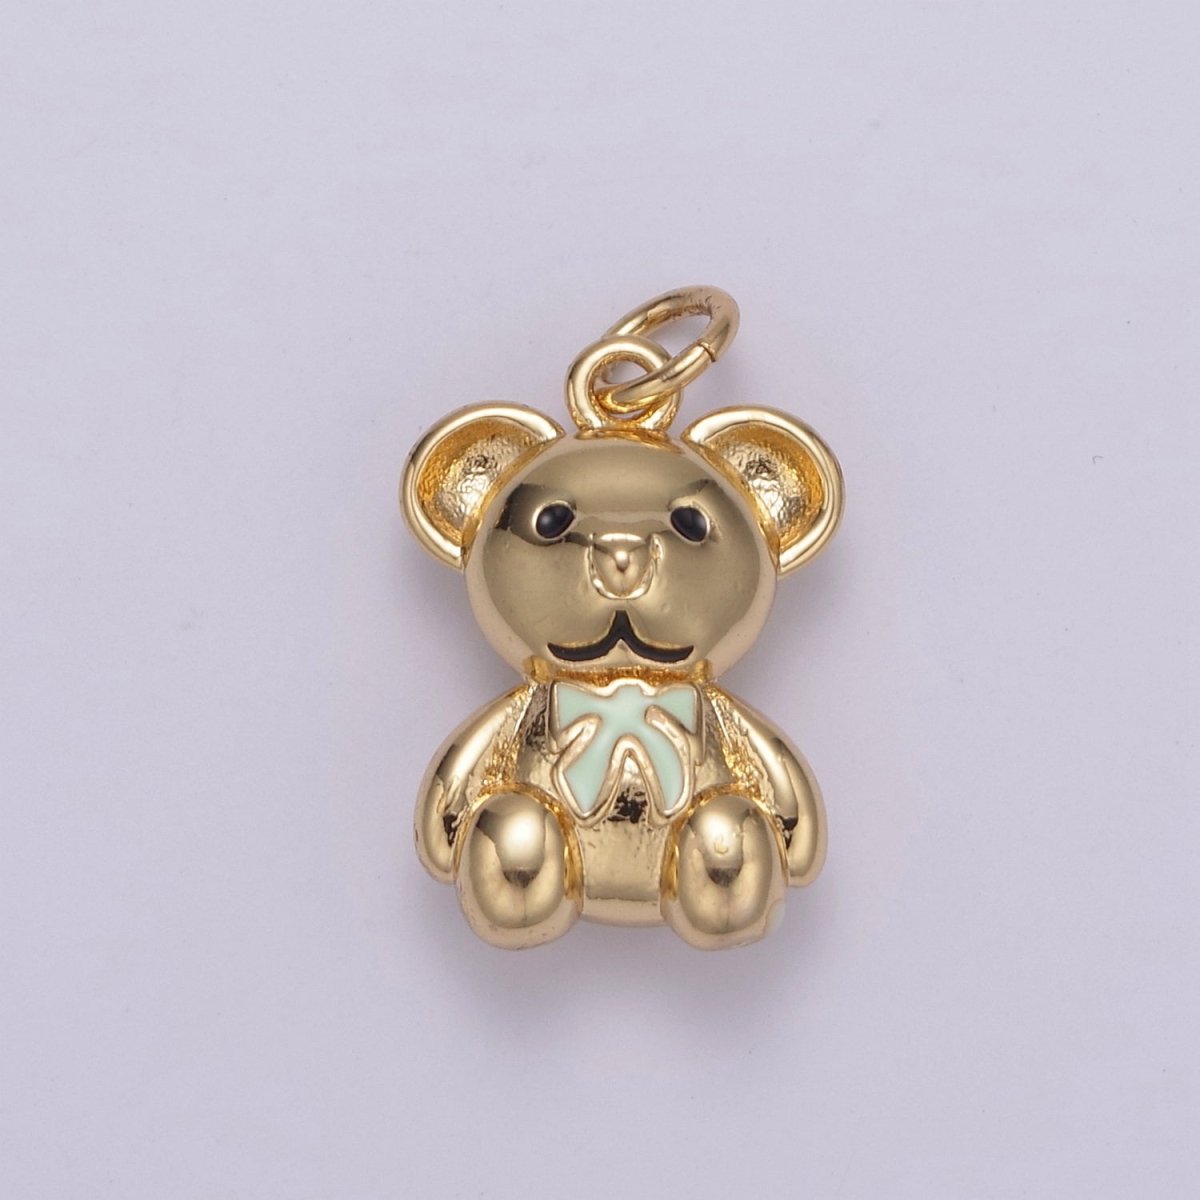 Dainty 14k Gold Filled Teddy Bear Charm with Pink / Green Ribbon Mini Bear Pendant for Bracelet Necklace Earring C-206 C-212 - DLUXCA